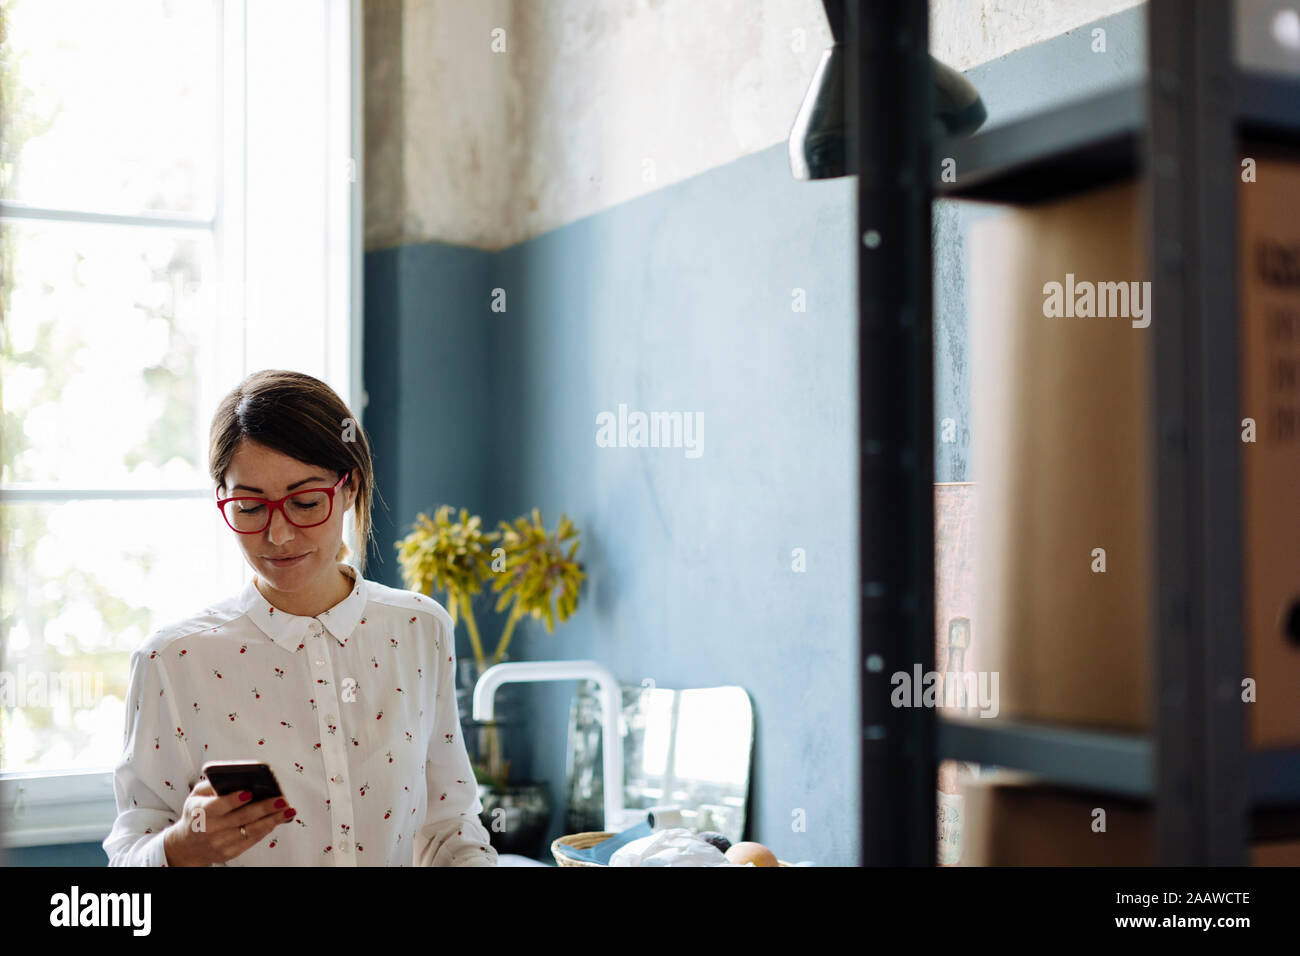 Woman using smartphone in office kitchenet Stock Photo